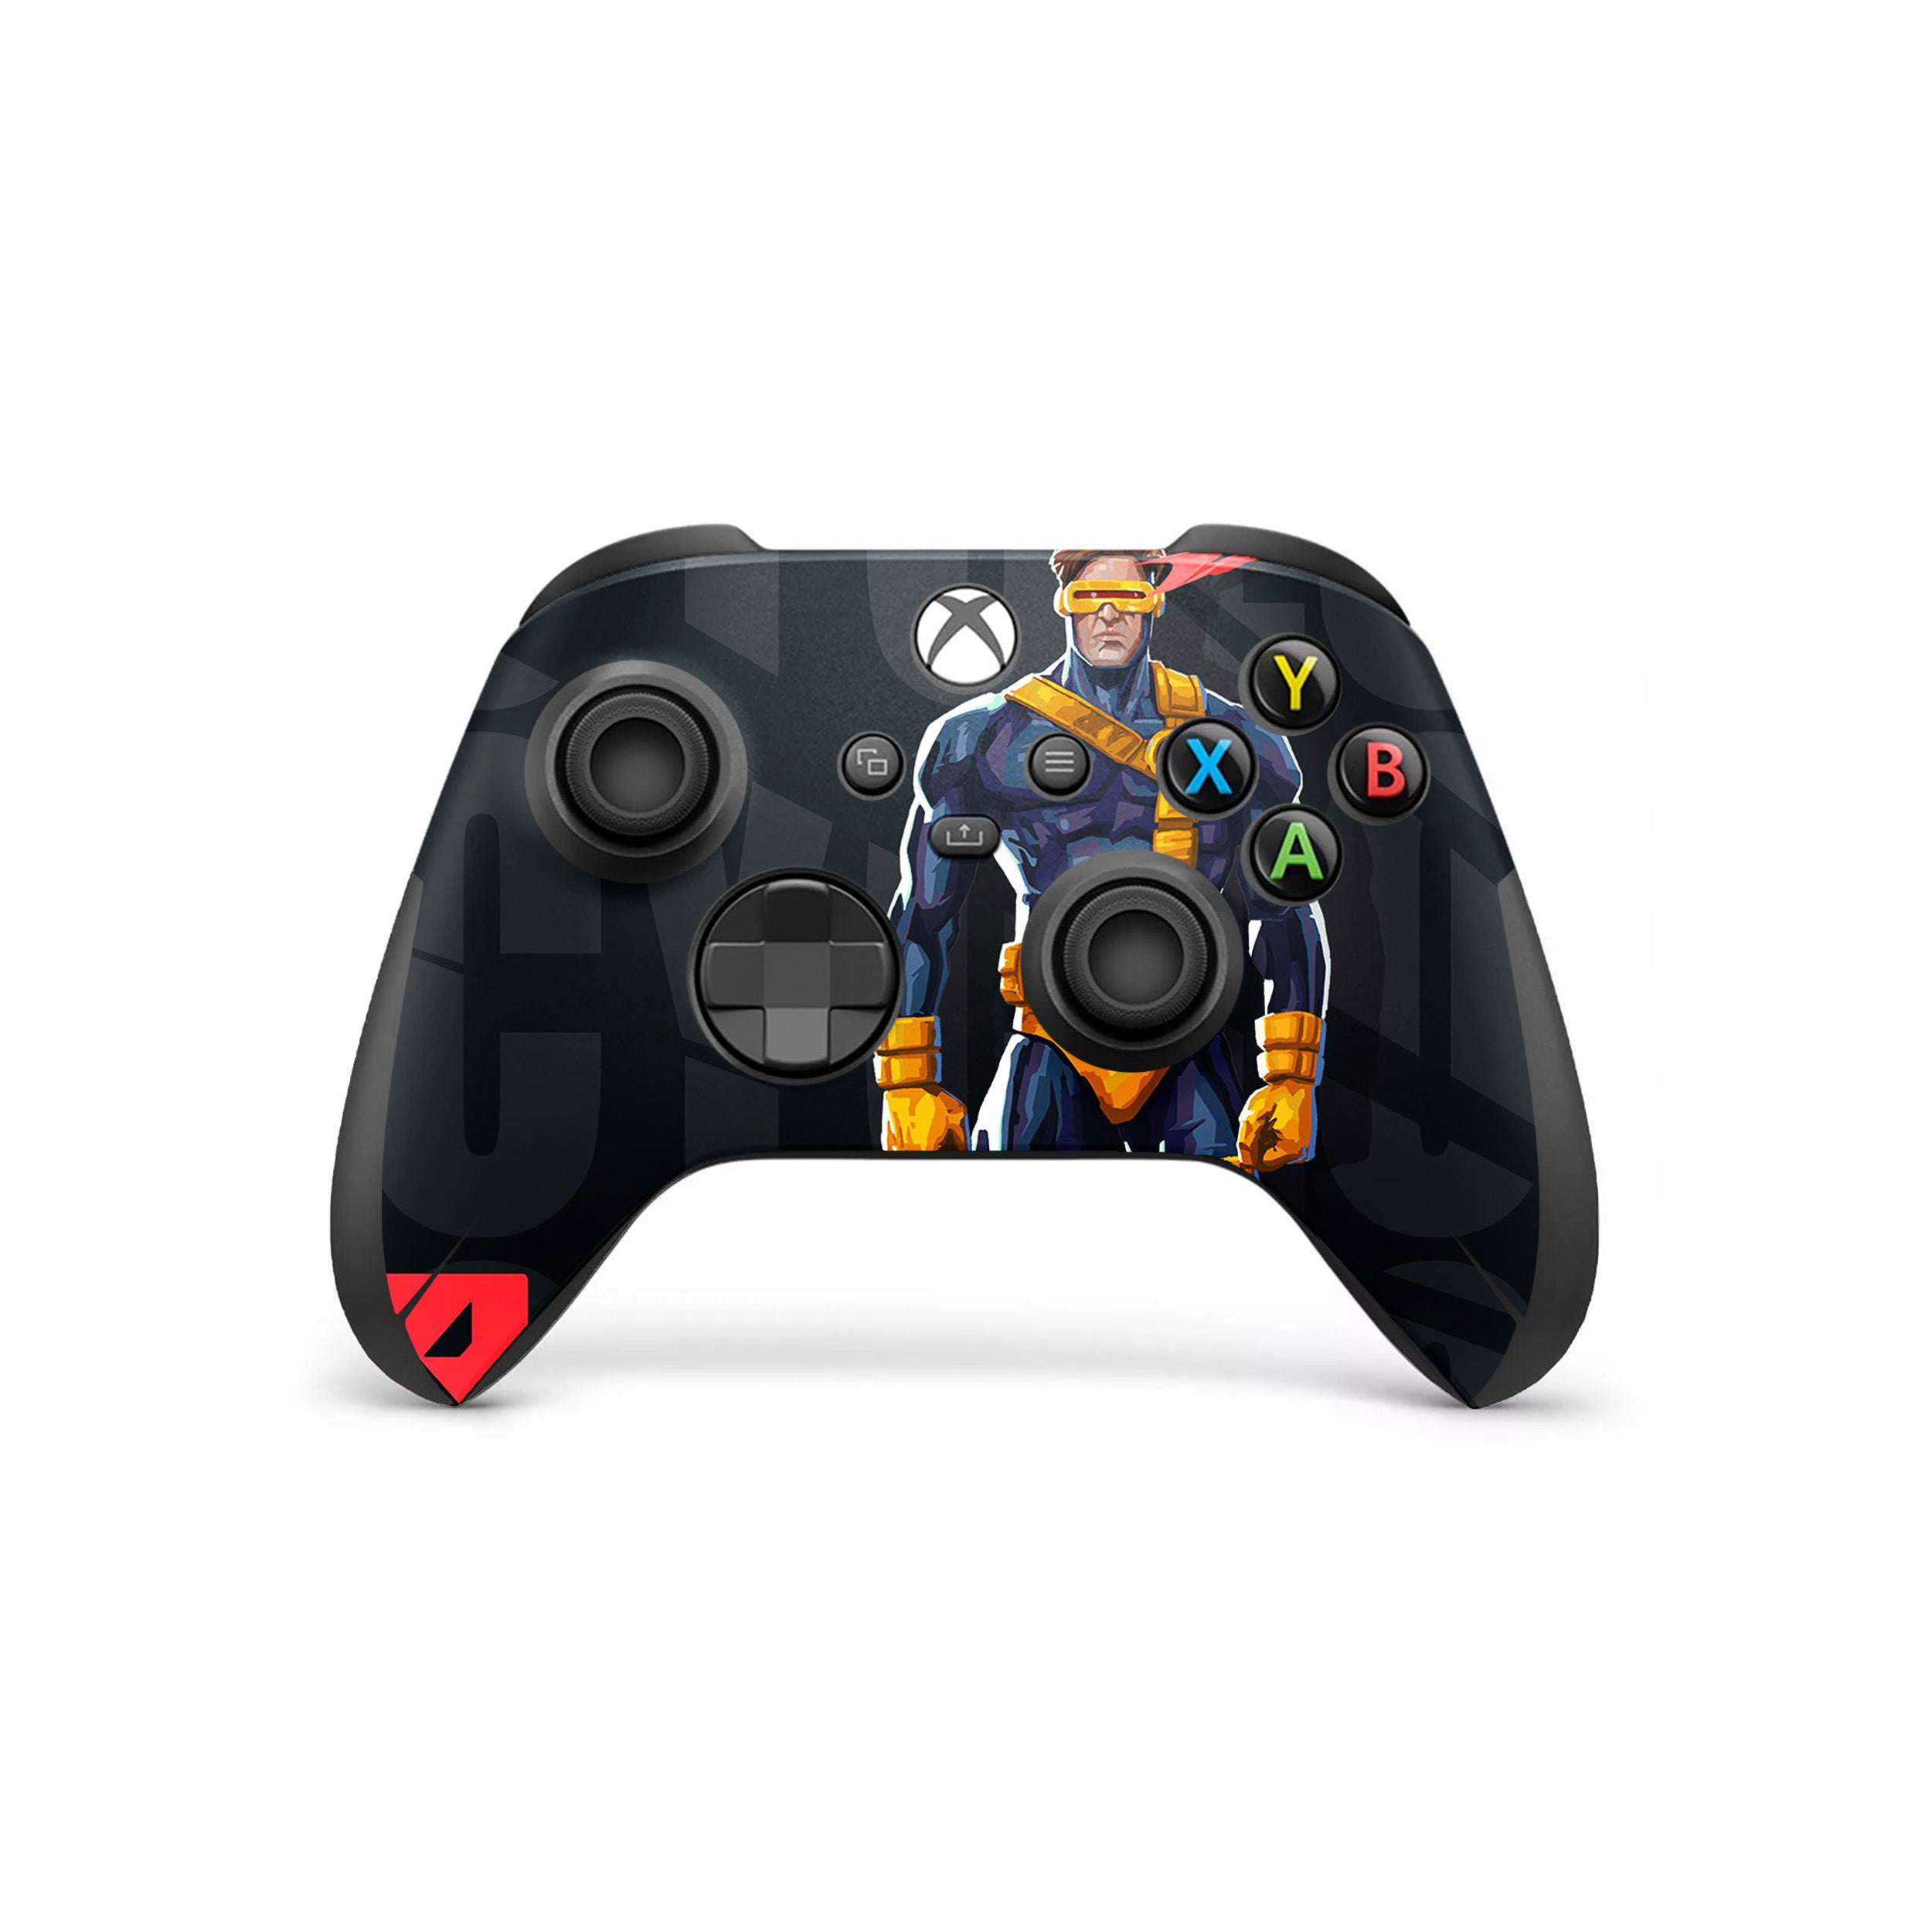 A video game skin featuring a Marvel Comics X Men Cyclops design for the Xbox Wireless Controller.